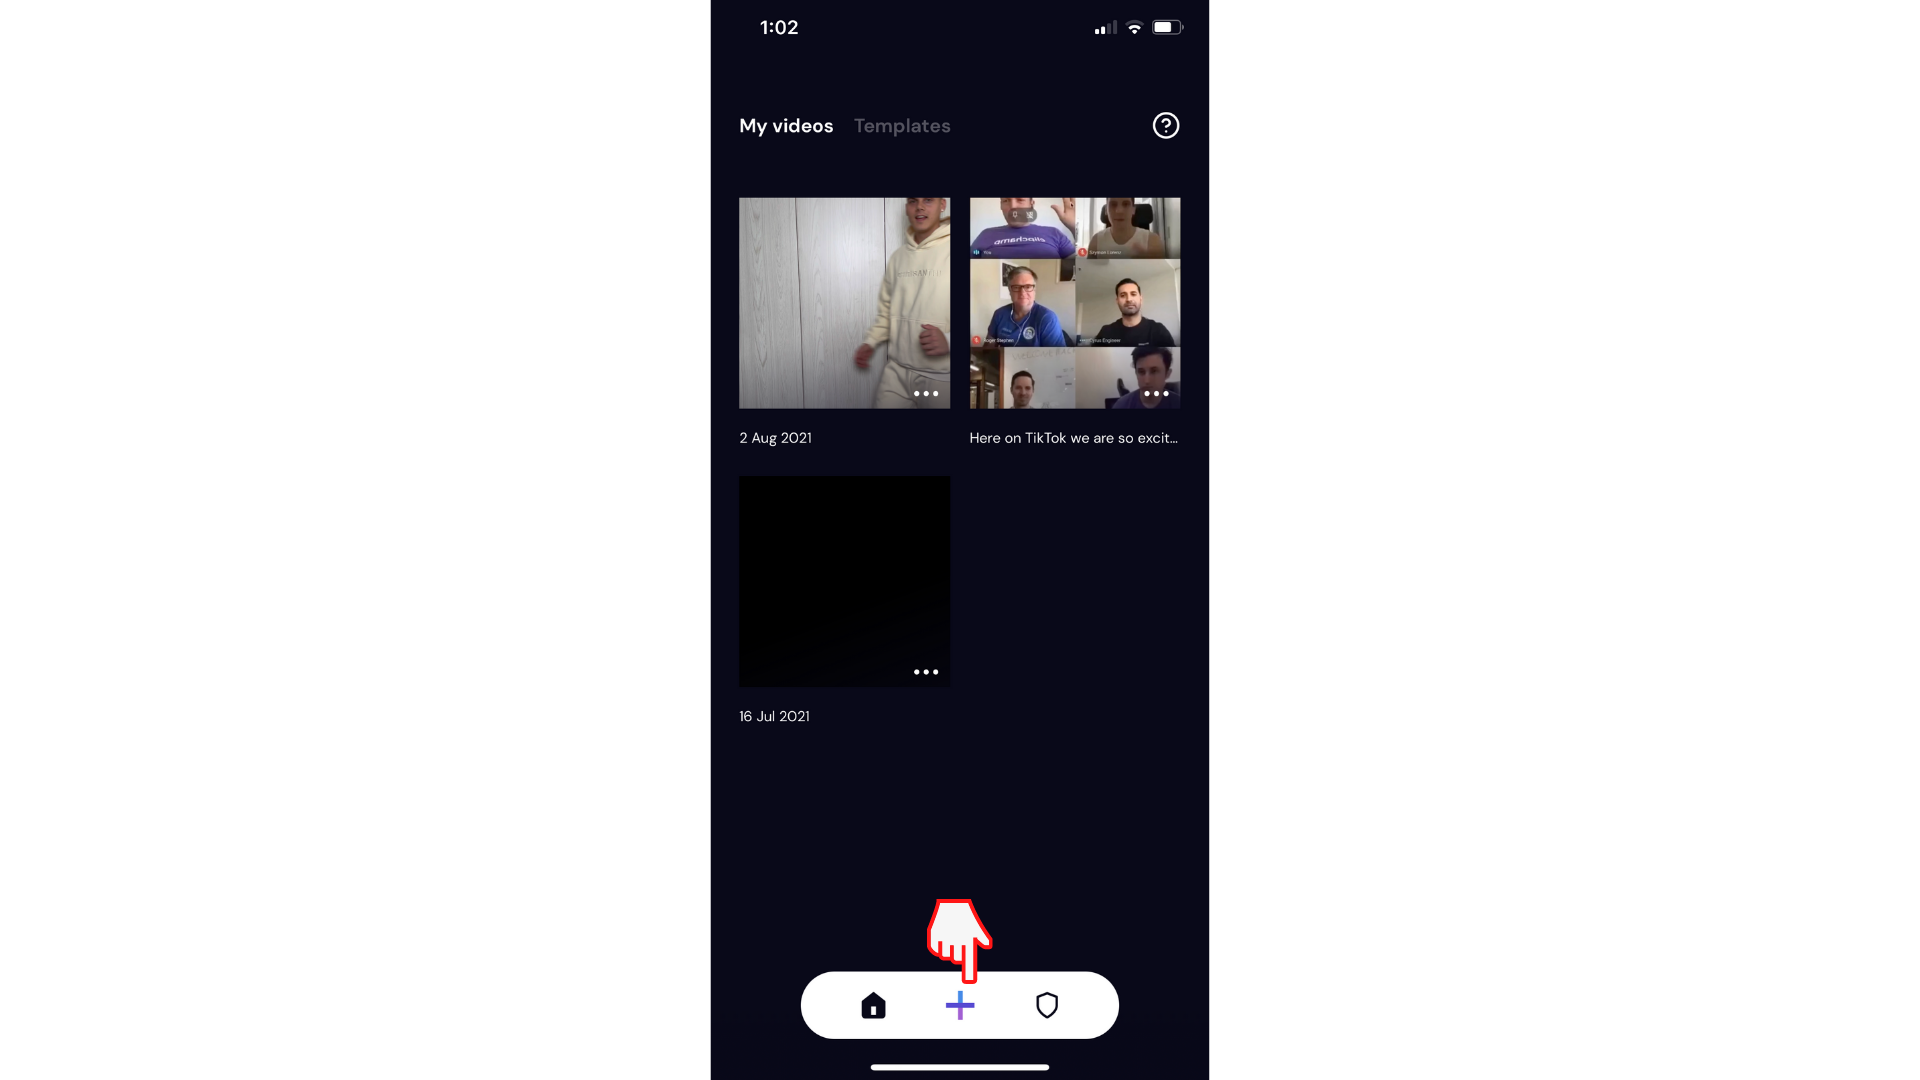 User creating a new video on Clipchamp iOS app by clicking the plus button